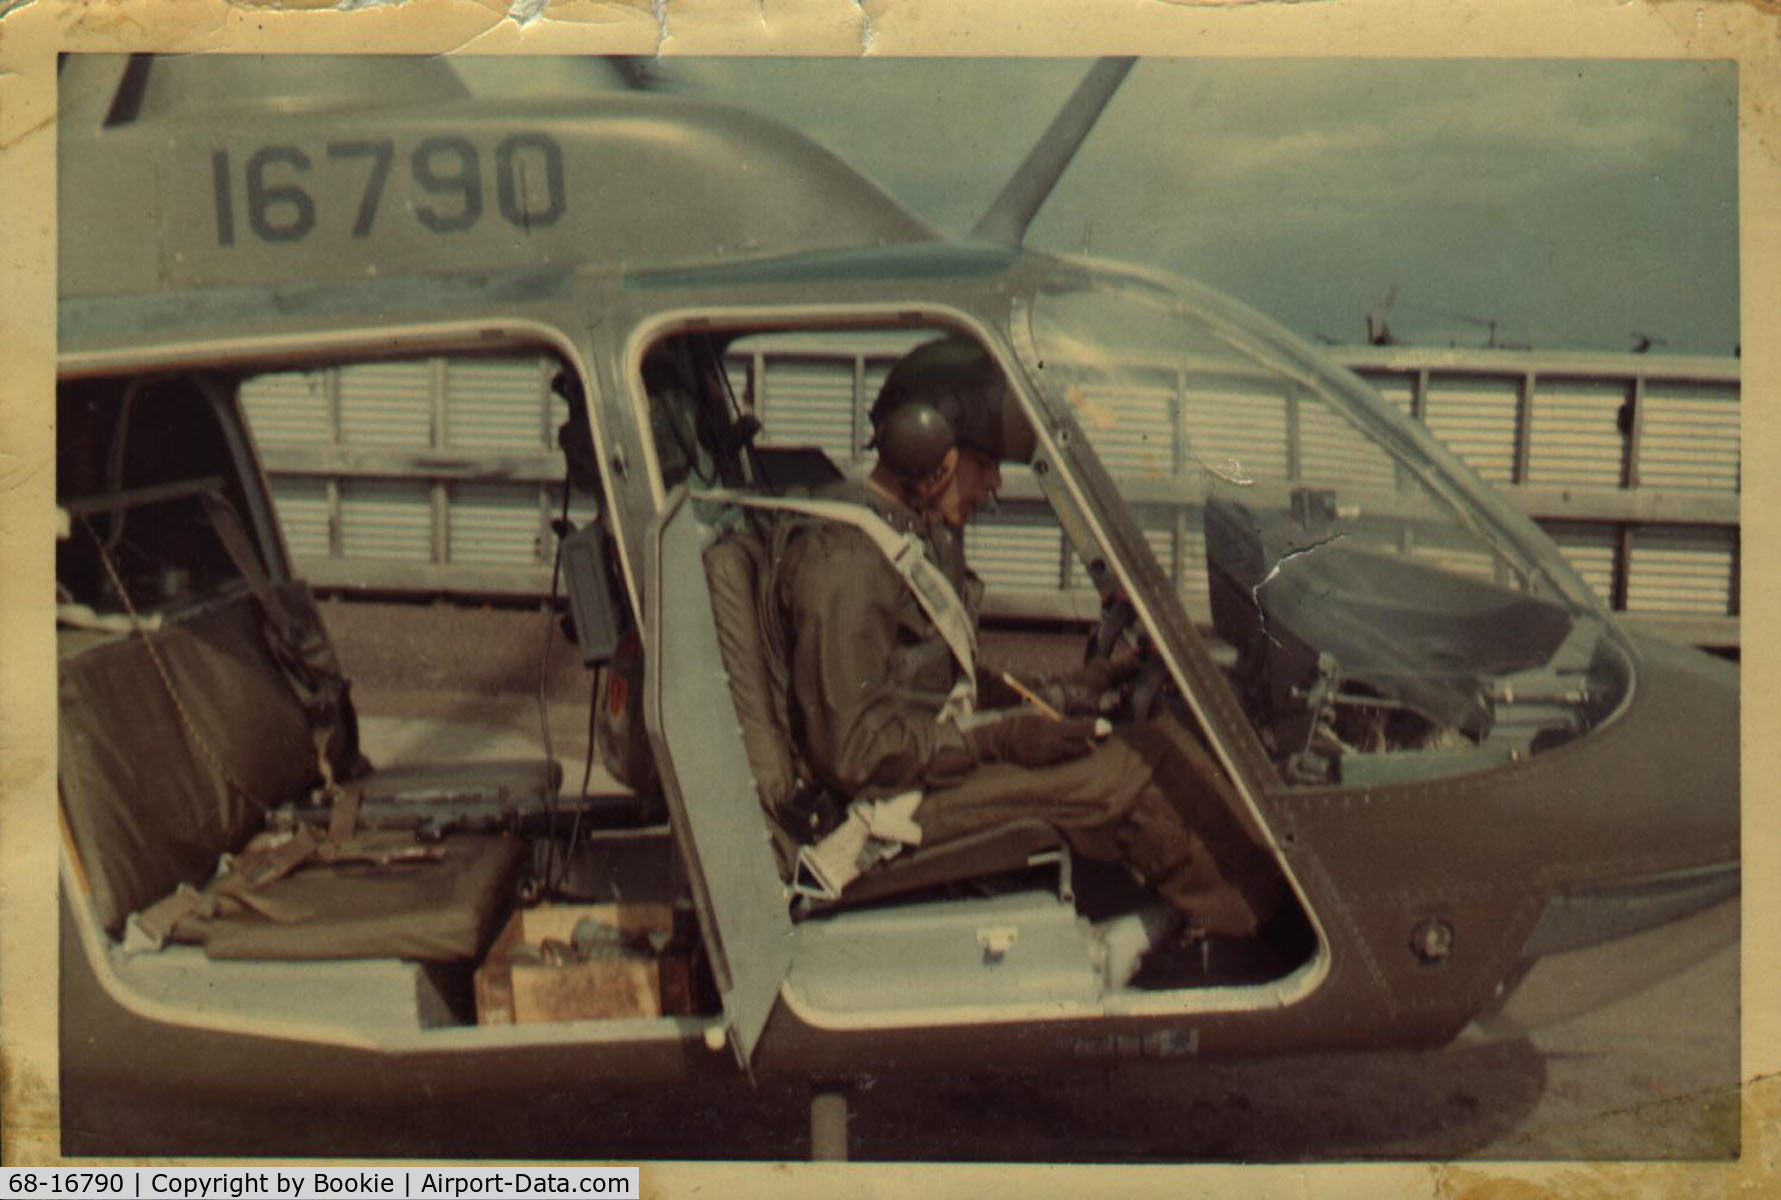 68-16790, 1968 Bell OH-58A-BF Kiowa C/N 40104, Taken in a revetment at  Sanford Army Airfield, Long Bien, Viet Nam. July of 1970.  I'm filling out the log book after concluding all the flights for the day.  Grenades & M-60 machine gun in the back.